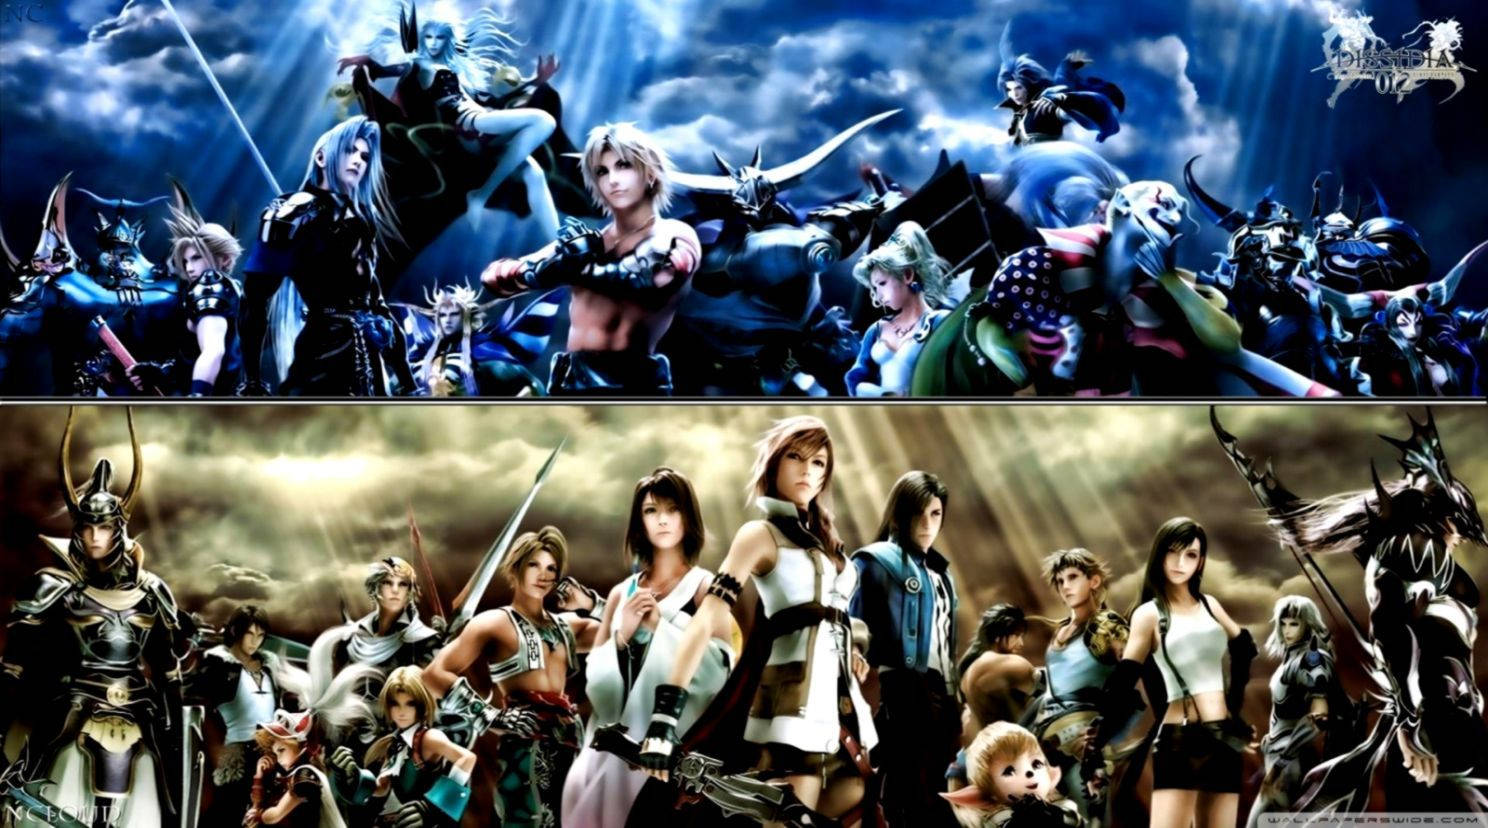 Battle through the realm of Dissidia in FINAL FANTASY! Wallpaper